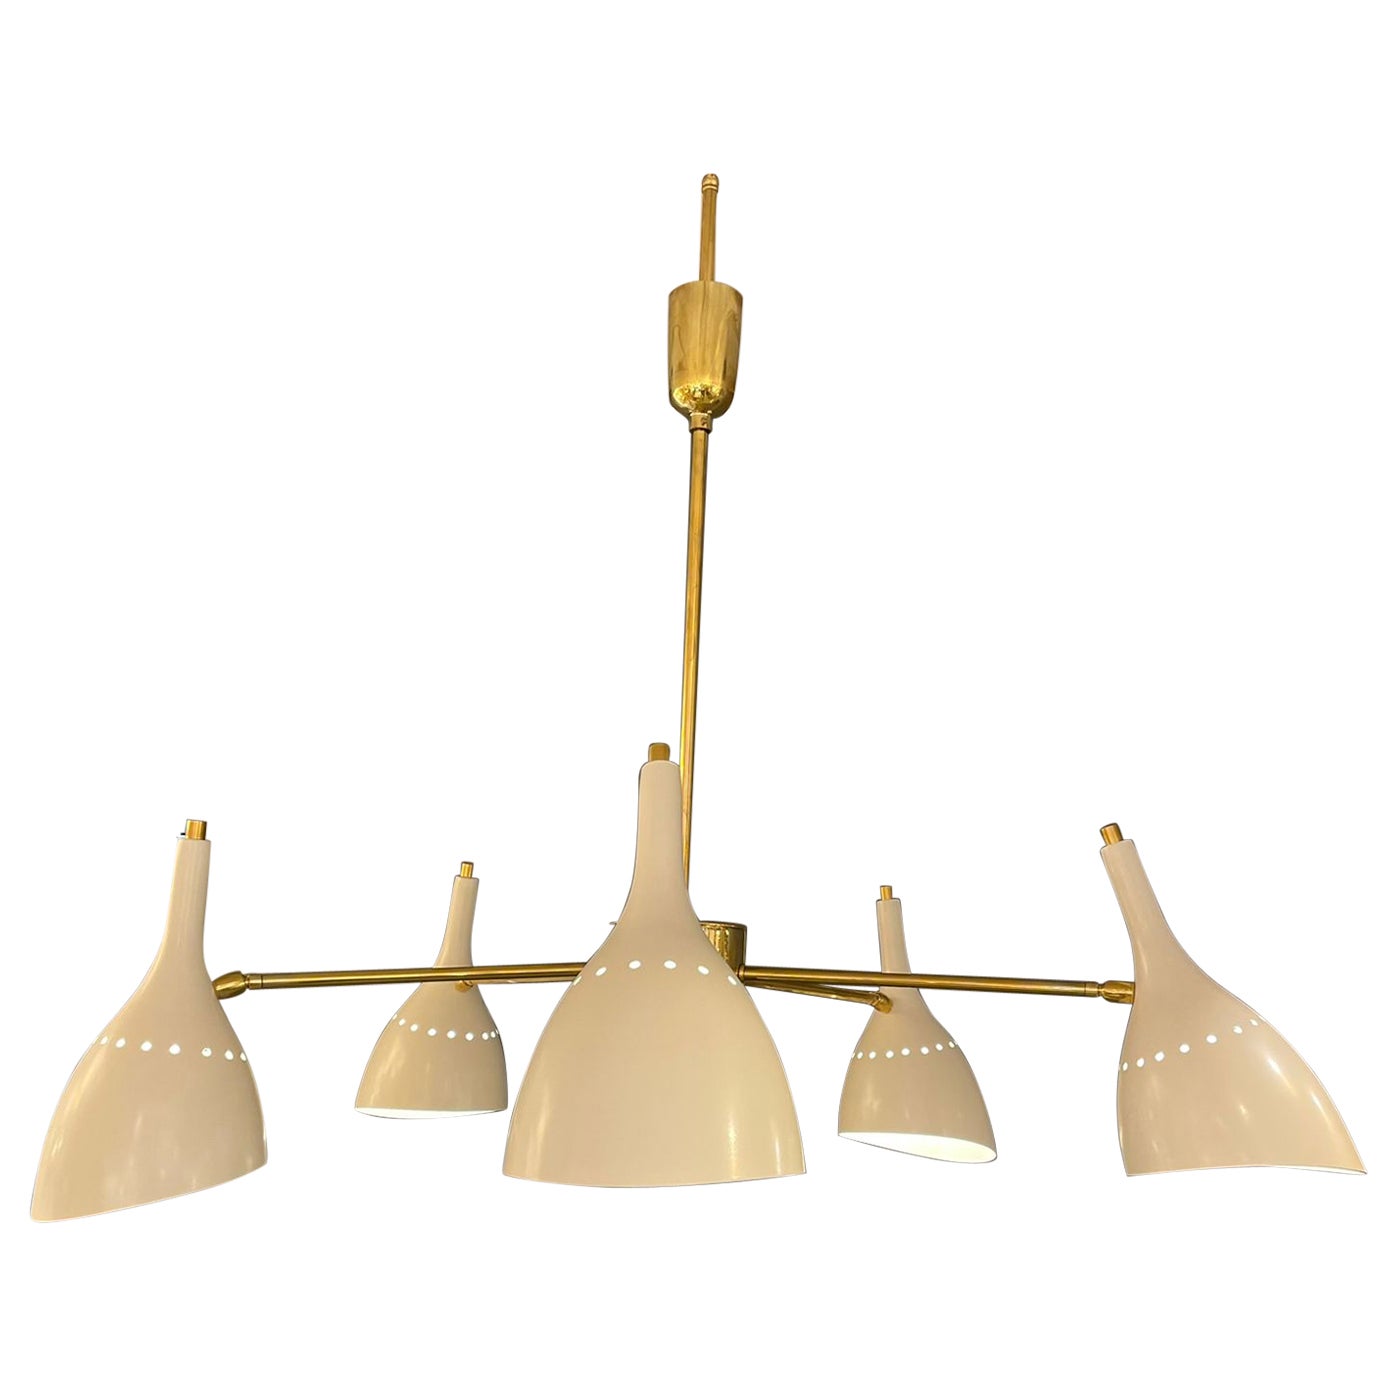 Italian Chandelier in Brass with 5 Arms and Ivory Shades, circa 1970